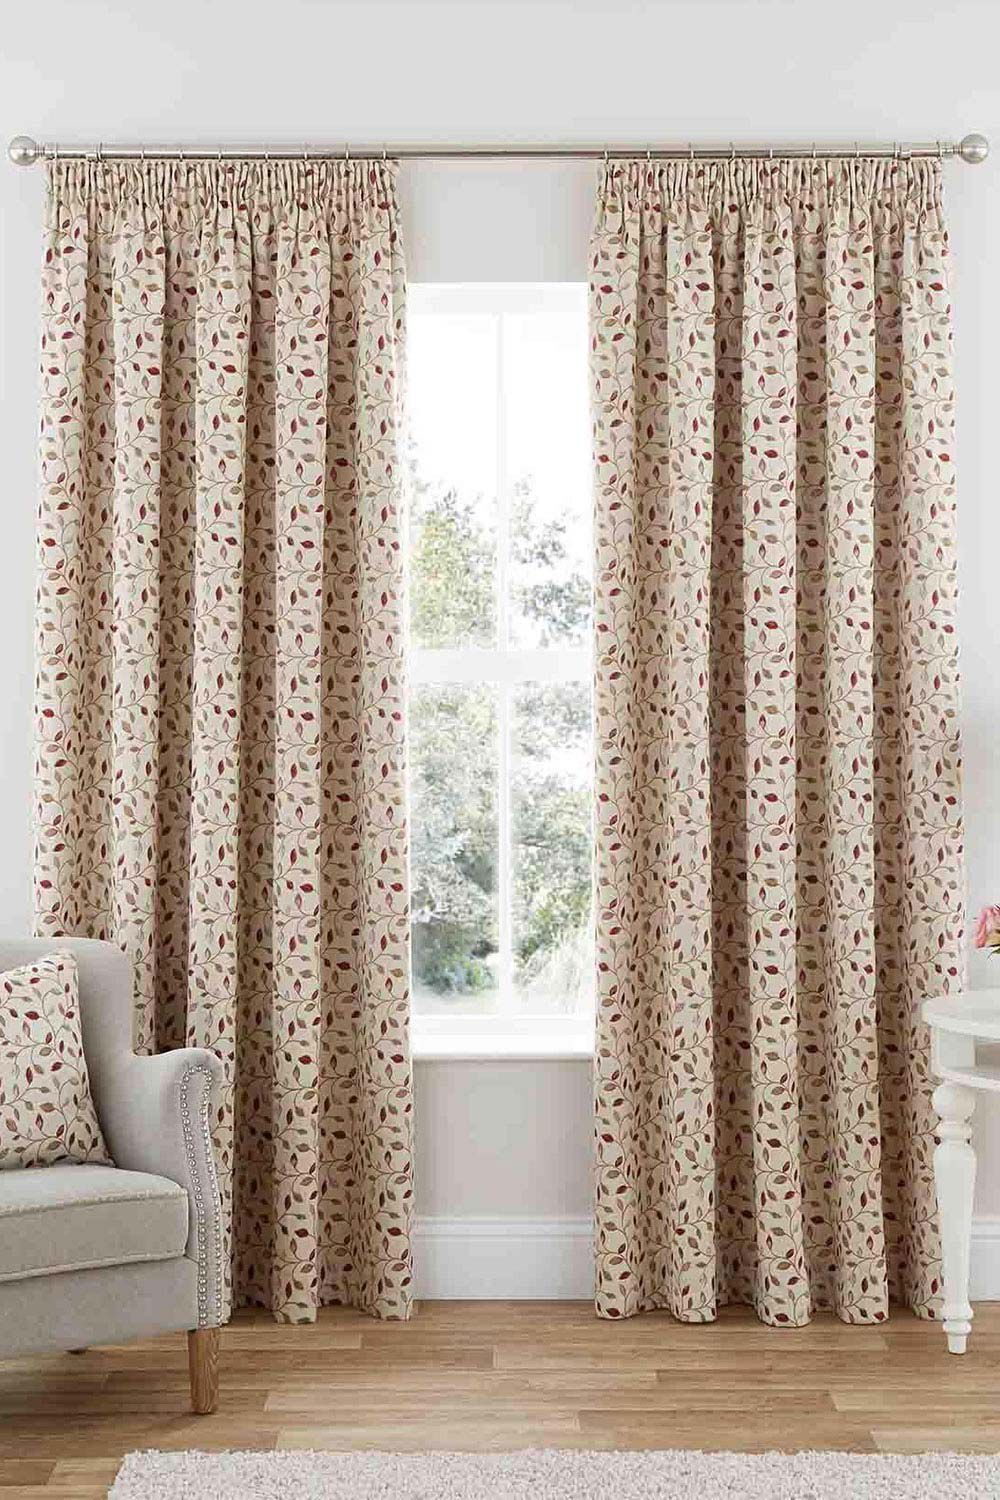 Bonmarche Red Sherbourne Jacquard Pencil Pleat Curtain Pair, Size: 90 Inch